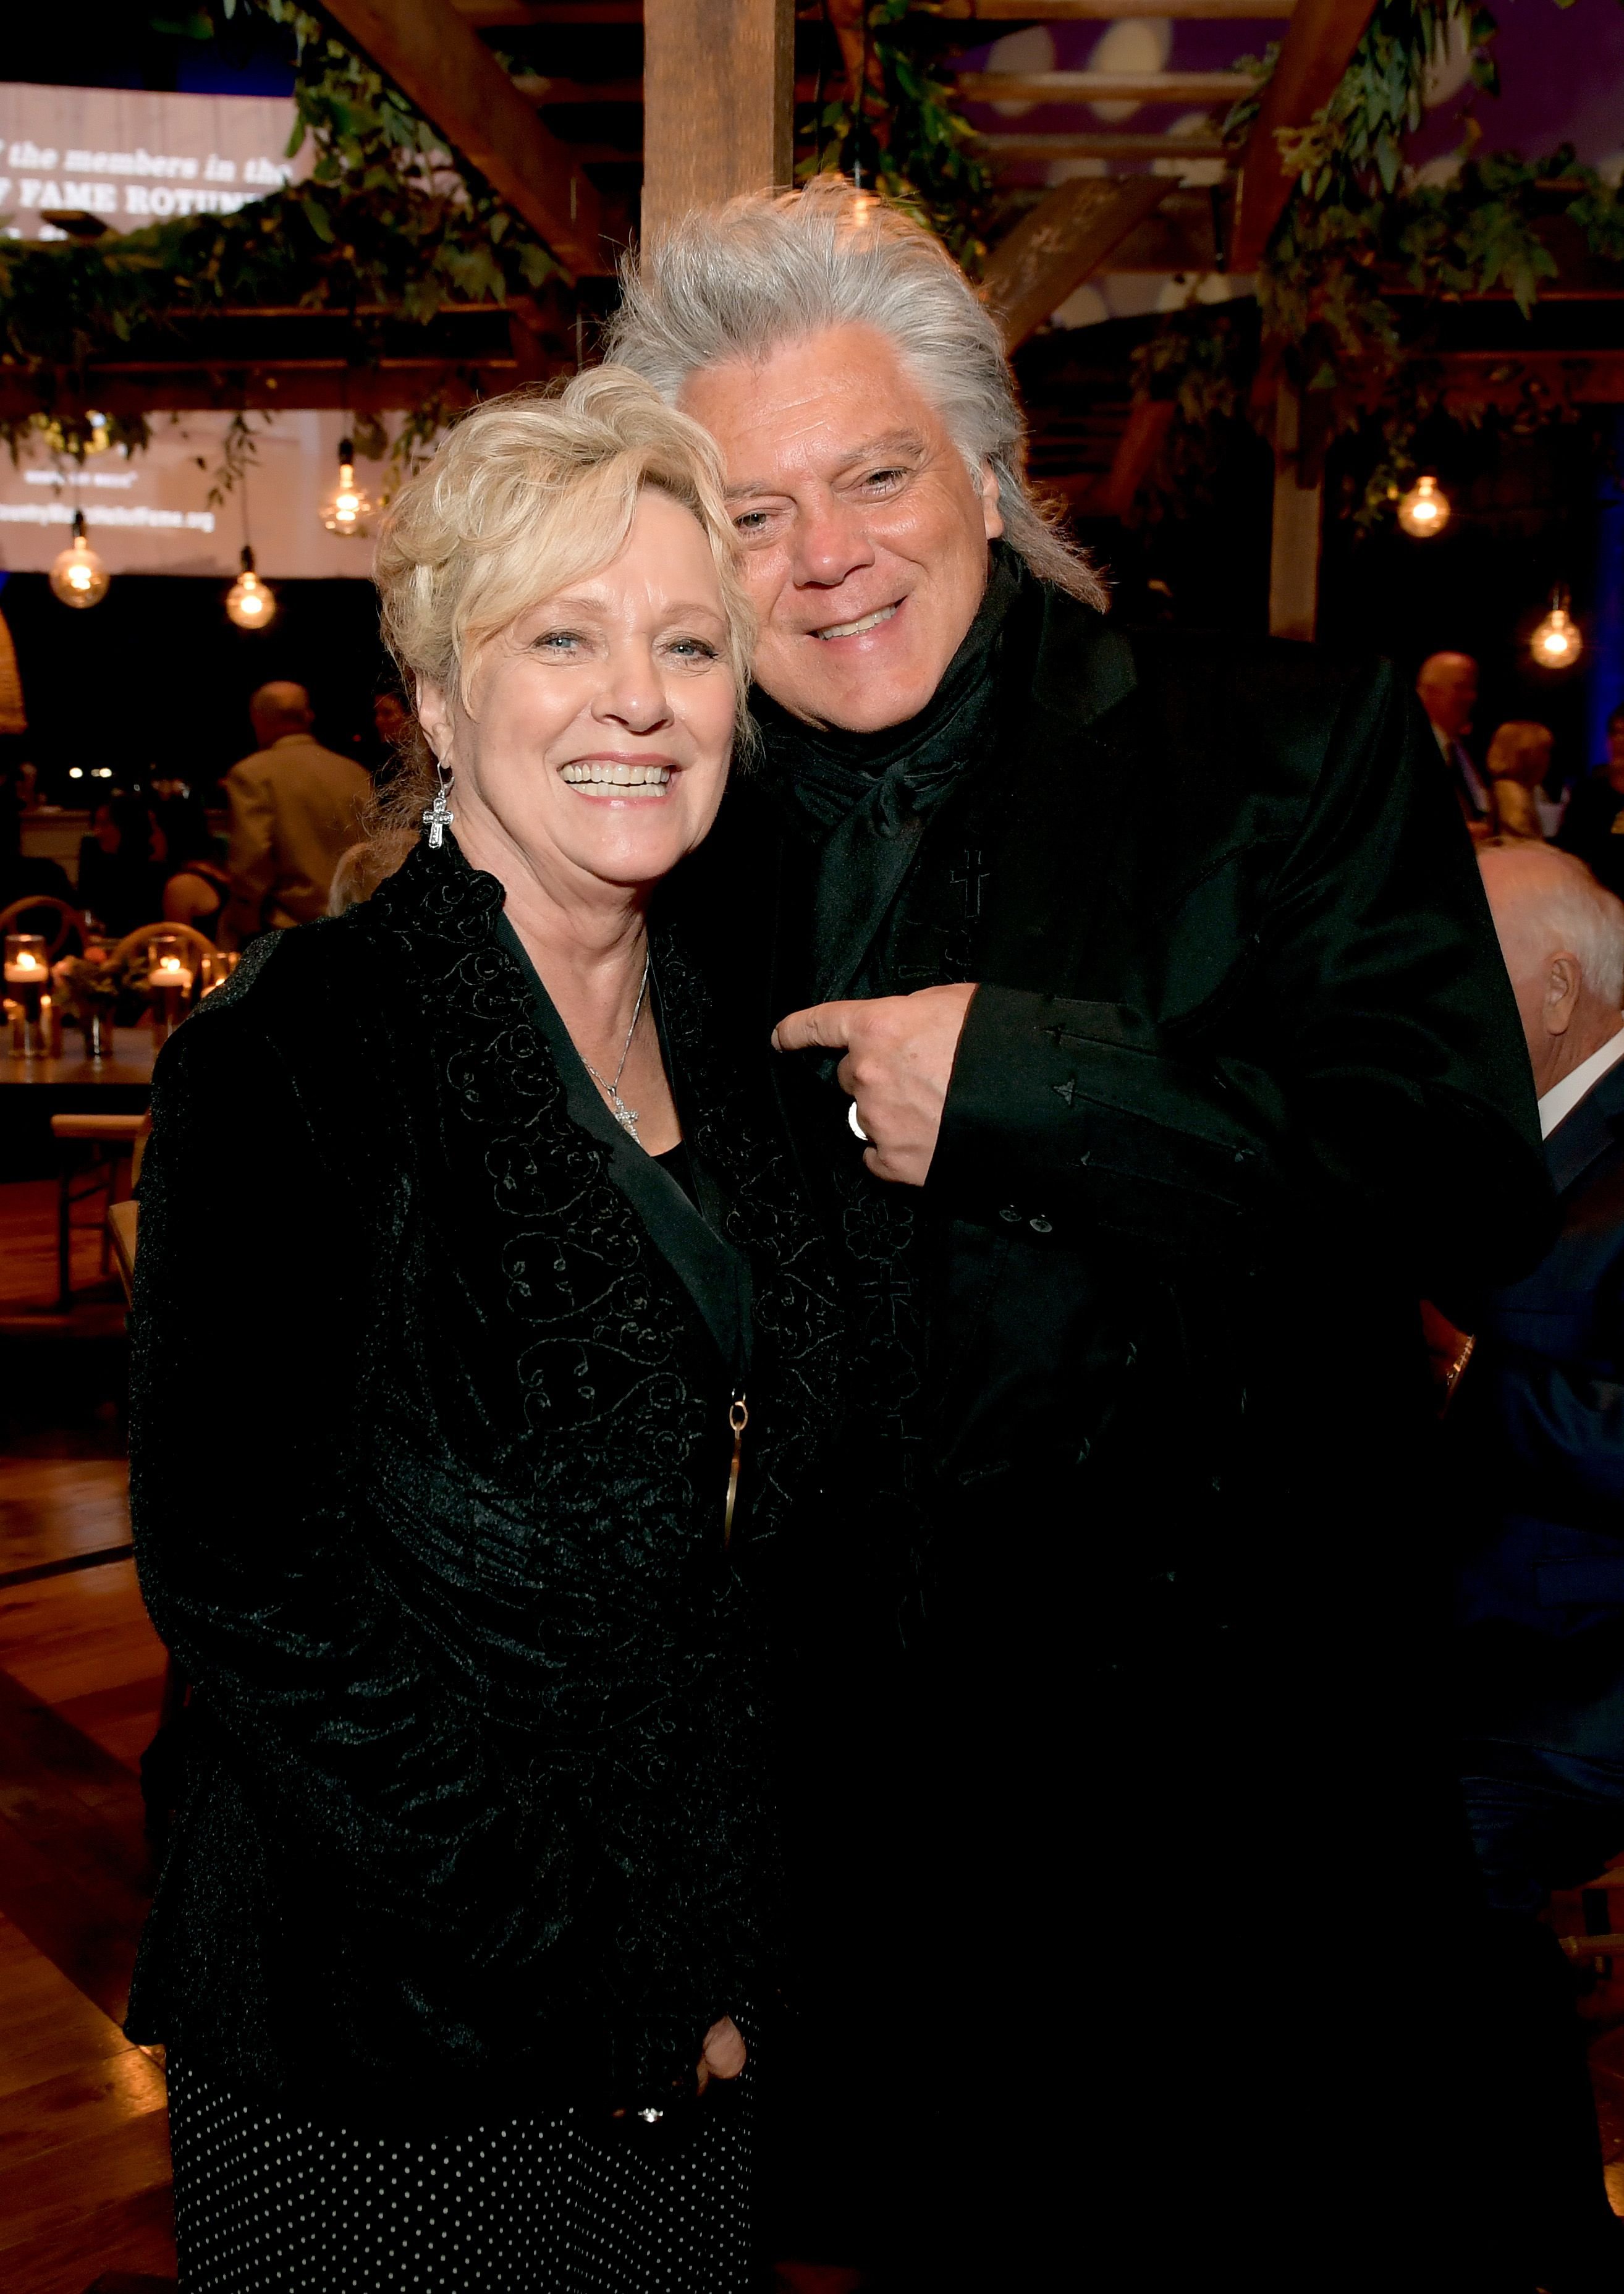 Connie Smith and Marty Stuart at the 2019 Country Music Hall of Fame Medallion Ceremony on October 20, 2019. | Photo: Getty Images